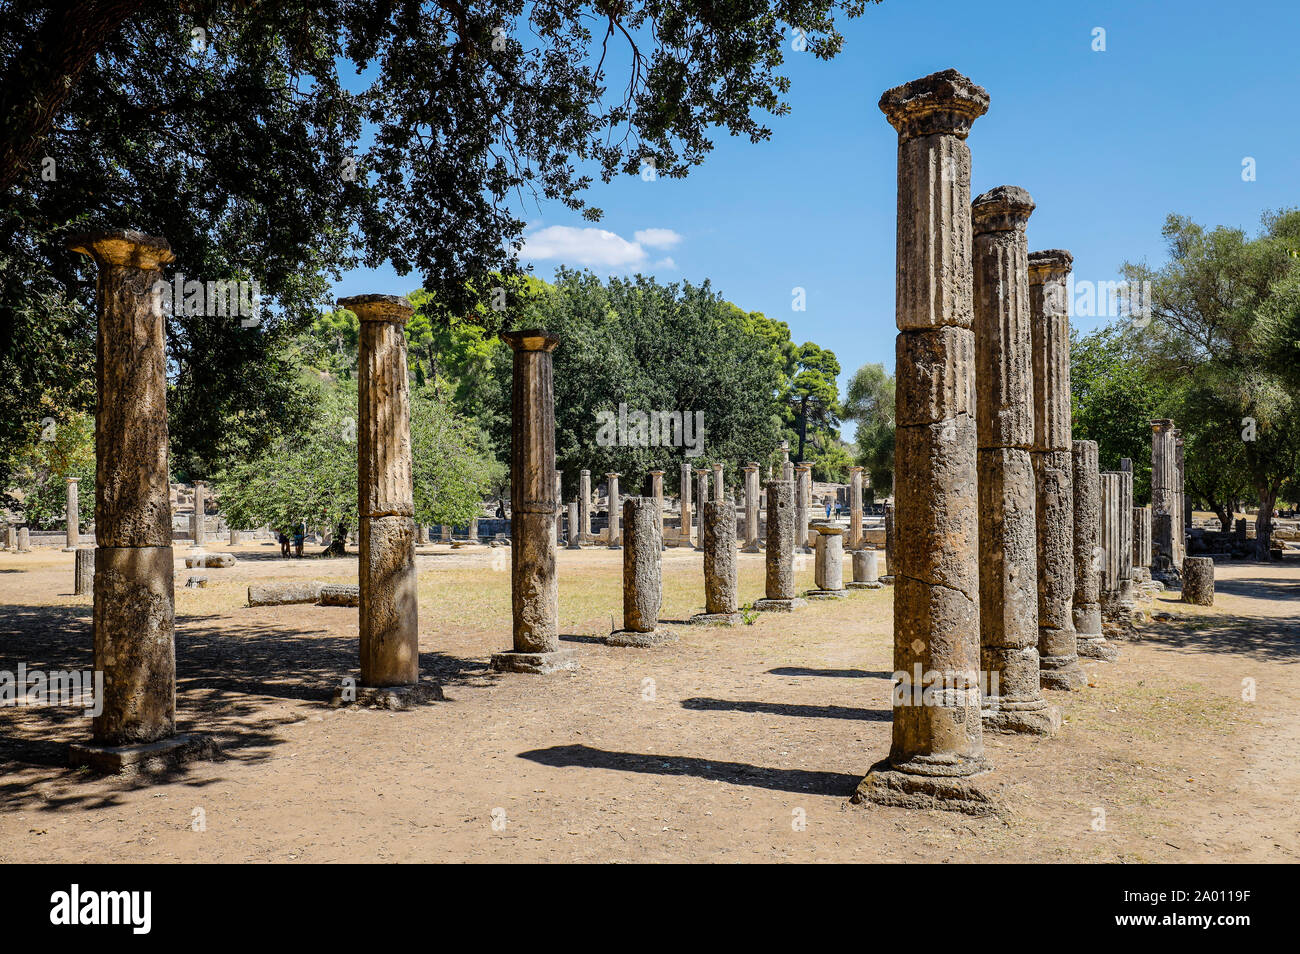 Olympia, Elis, Peloponnese, Greece - Ancient Olympia, here colonnades with Doric columns of the wrestling school Palaestra.  Olympia, Elis, Peloponnes Stock Photo